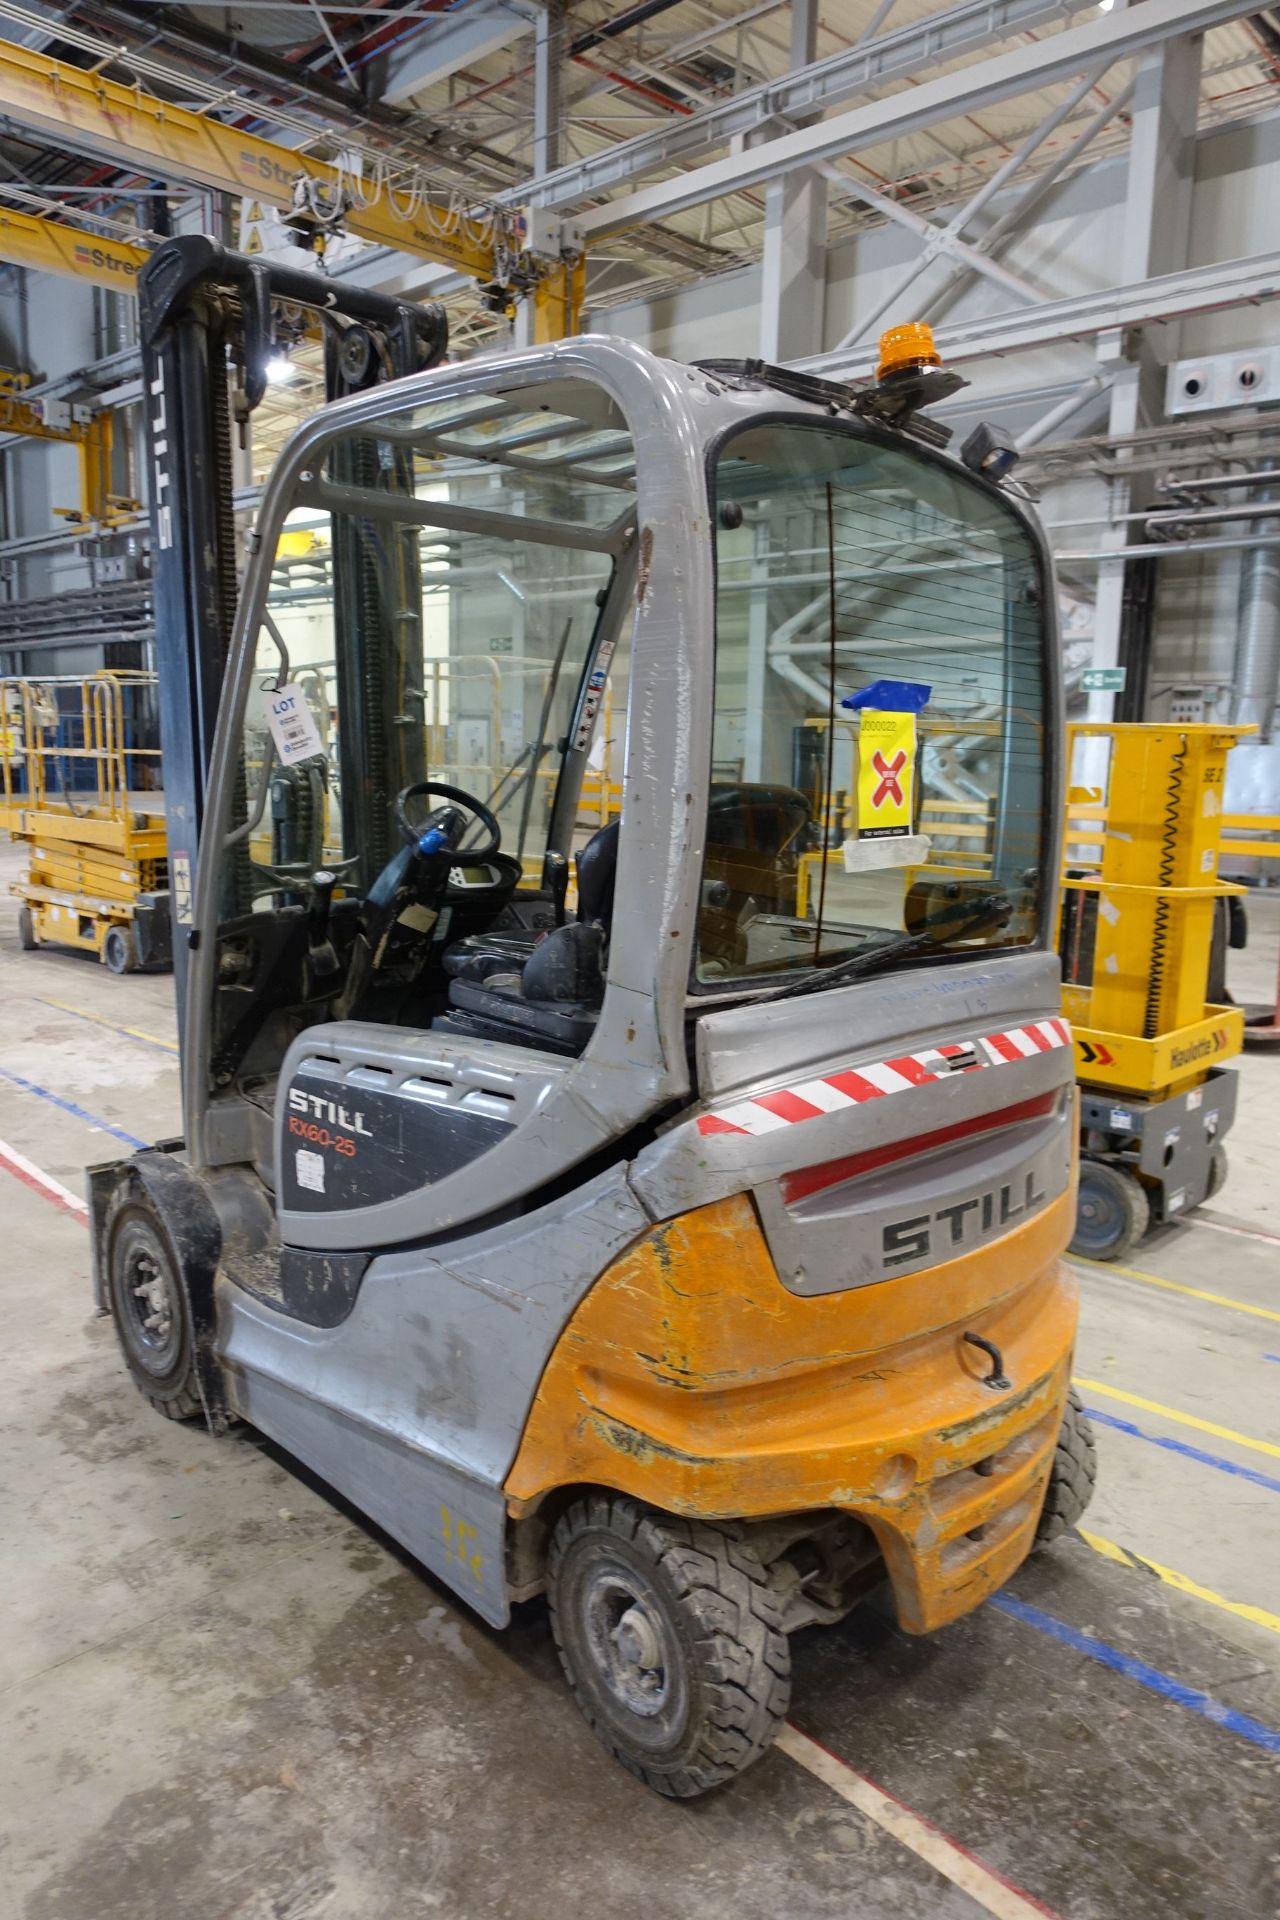 STILL RX60-25 Electric Forklift Truck, 2,500kg Capacity with Sideshift, Asset # 3000022, Ser # - Image 11 of 52